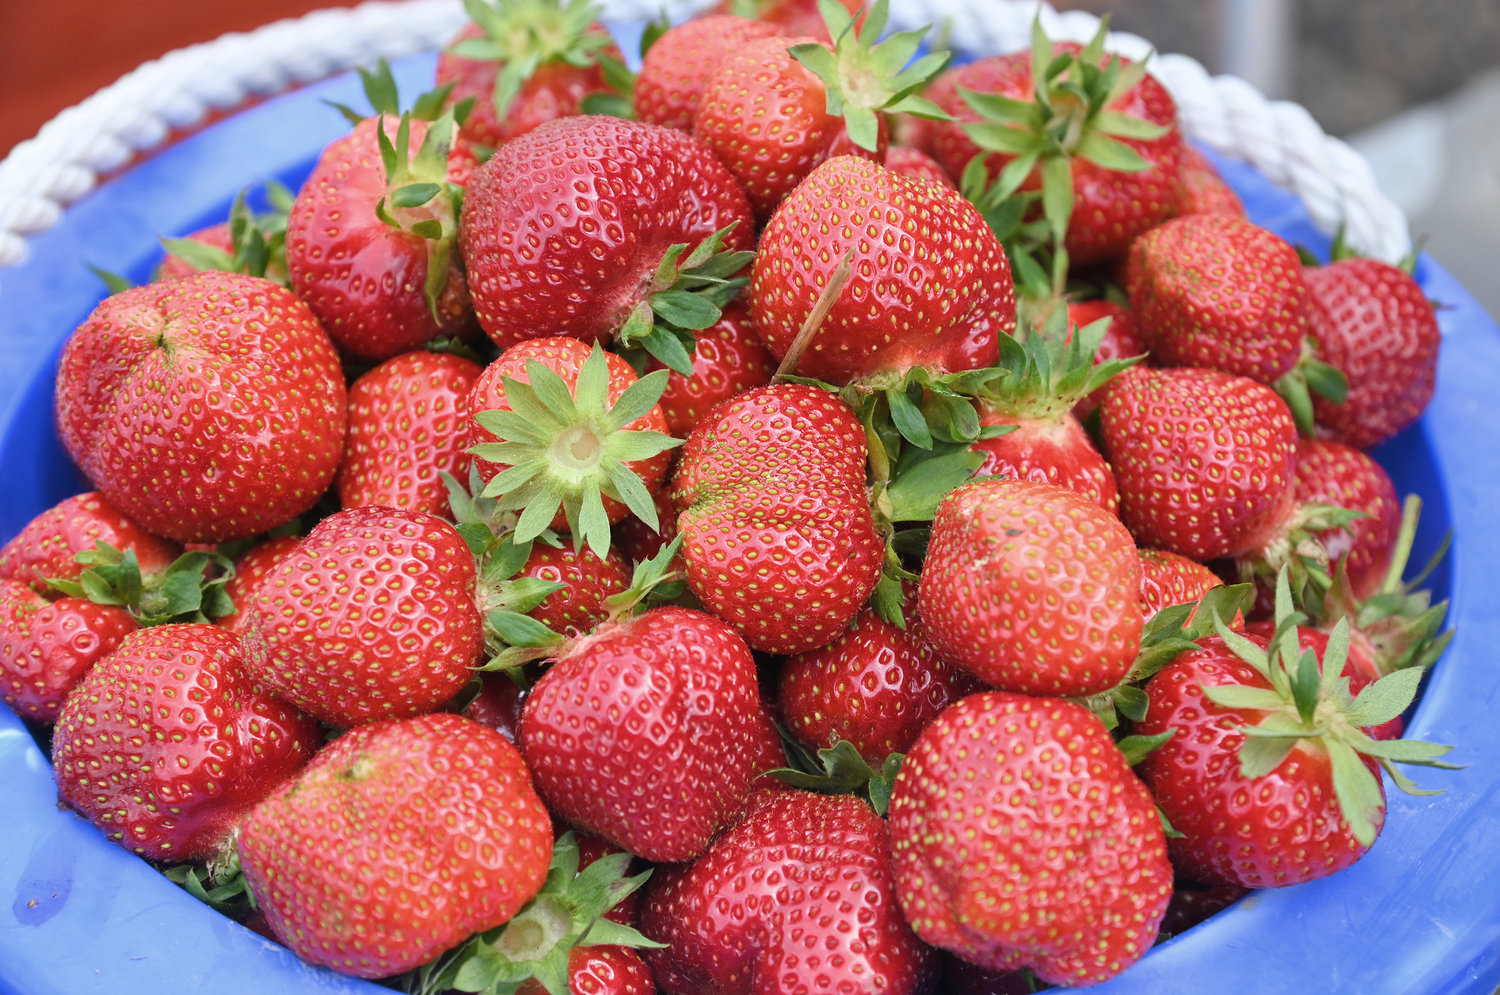 Strawberry's in a bucket at Swistak Farm on the first day of strawberry picking season on Greenway-New London Rd.